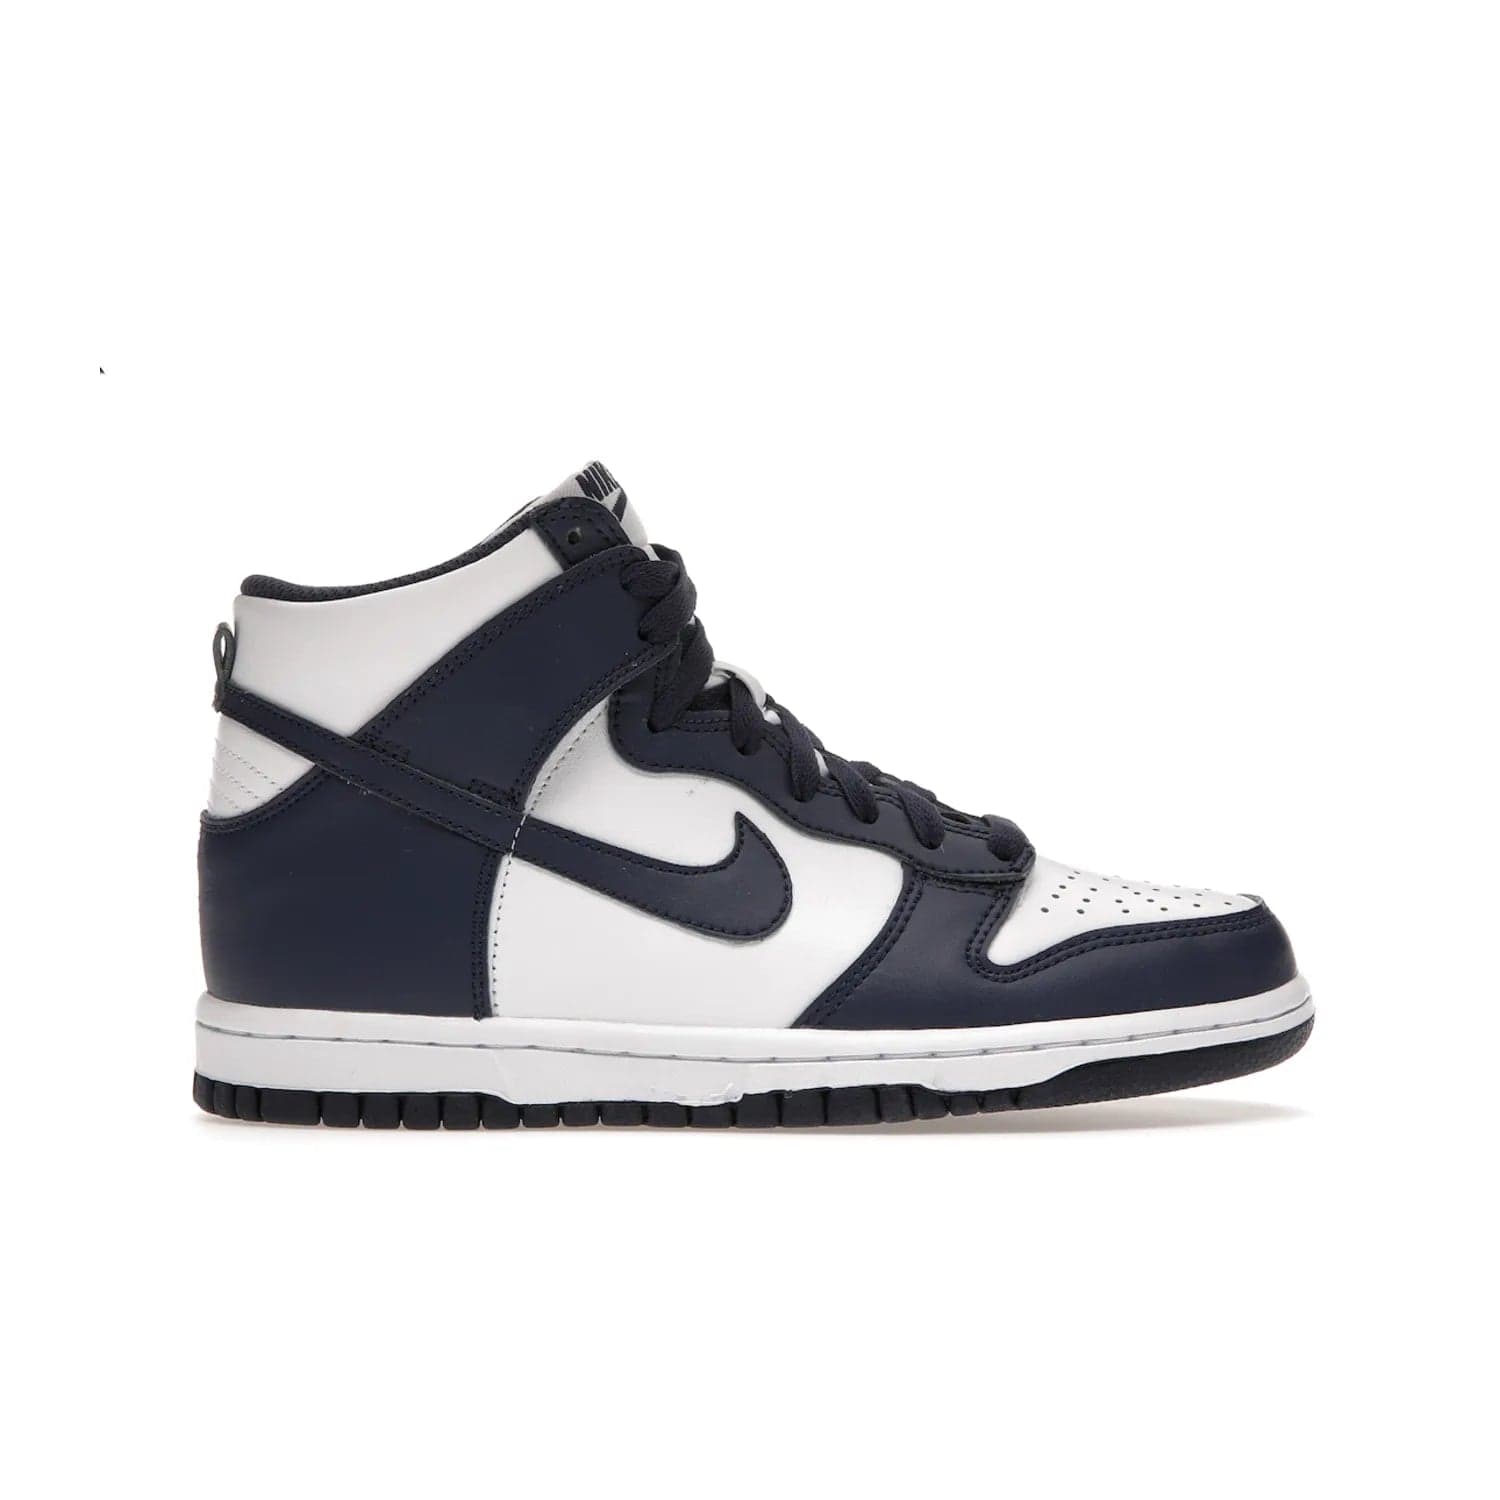 Nike Dunk High Championship Navy (GS) - Image 1 - Only at www.BallersClubKickz.com - Nike Dunk High Championship Navy GS: classic leather, suede, synthetic upper, chunky midsole, rubber herringbone sole. White base overlaid with Midnight Navy for a stylish finish. Padded high-cut collar and signature Nike swoosh design. Step out in these shoes and make a statement. Comfort and style at its finest.